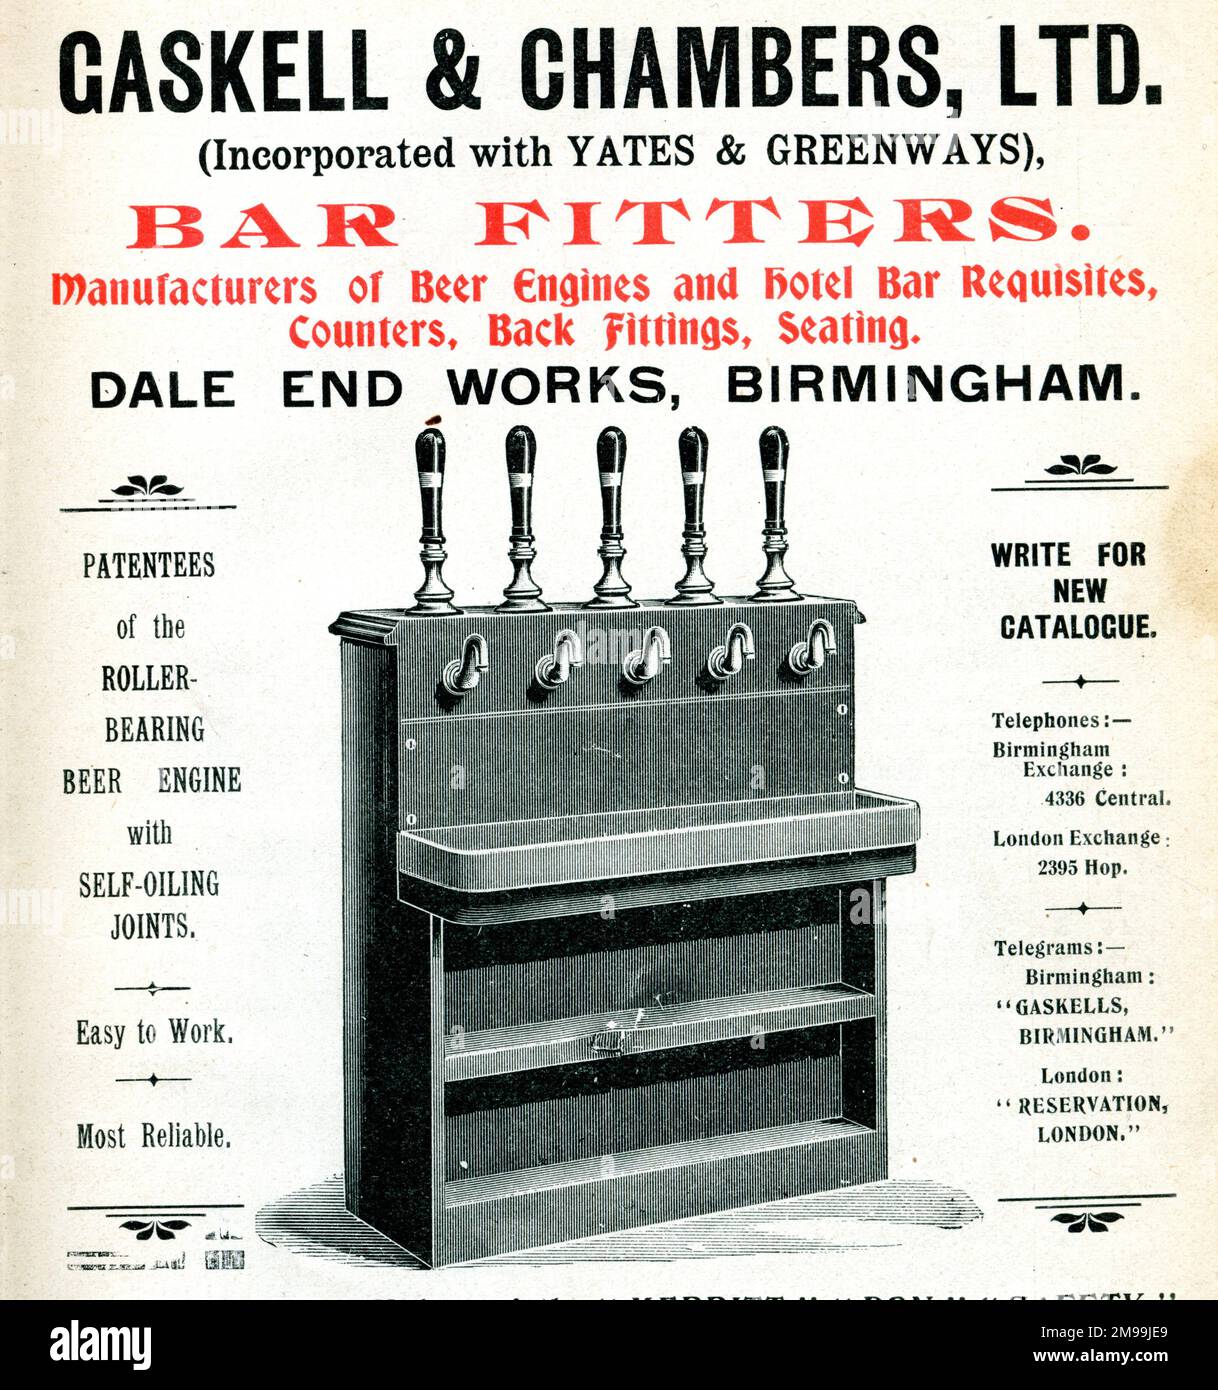 Advert for Gaskell & Chambers Ltd (incorporated with Yates & Greenways), Bar Fitters, Manufacturers of Beer Engines and Hotel Bar Requisites, Counters, Back Fittings, Seating. Dale End Works, Birmingham. Stock Photo